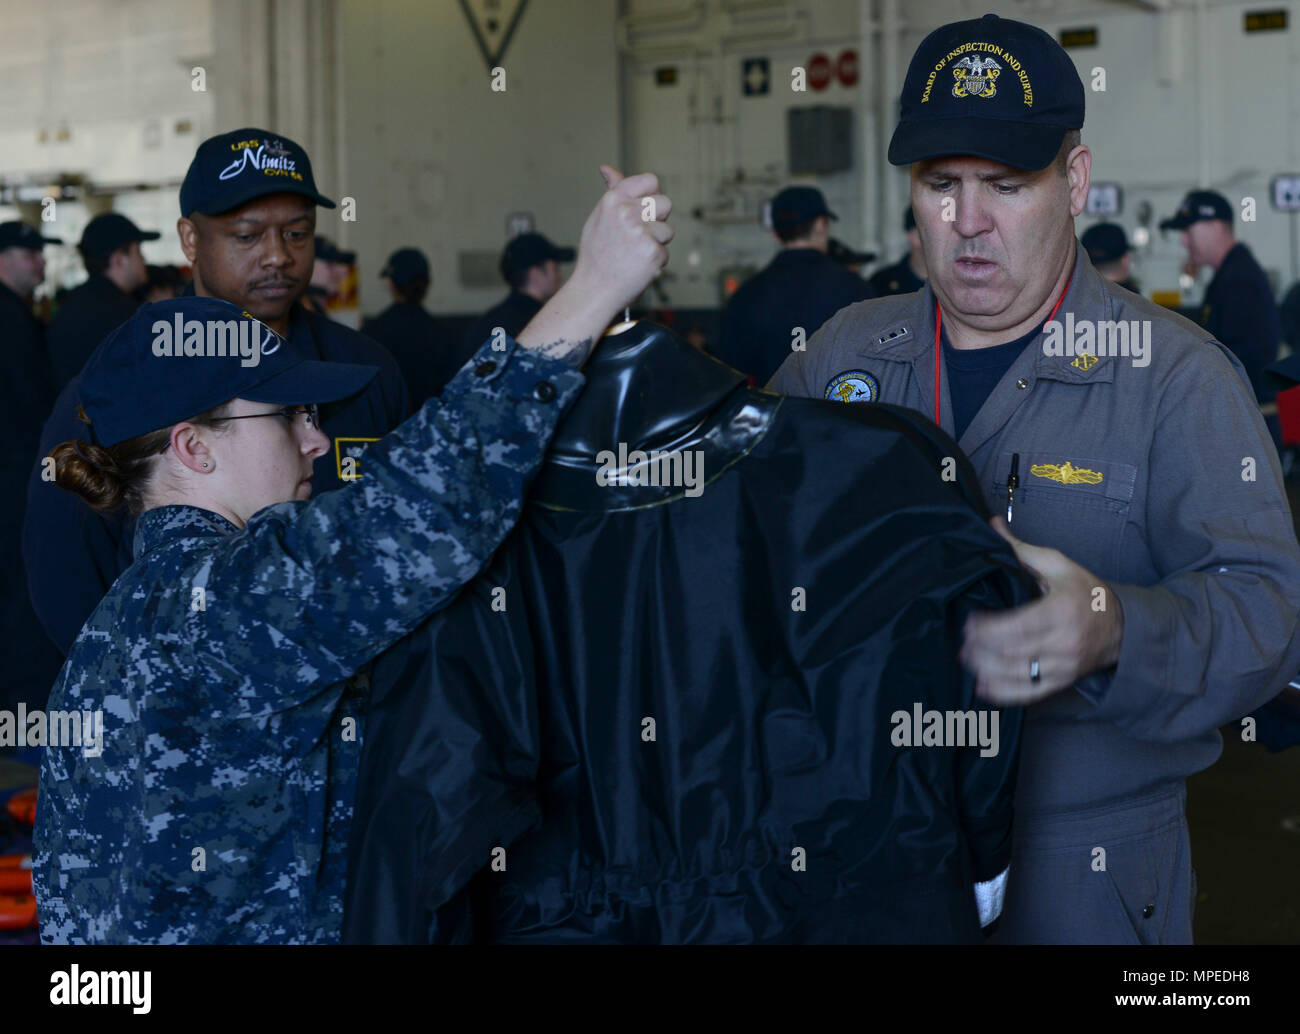 SAN DIEGO (Feb. 13, 2017) - Chief Warrant Officer 4 Richard Barr, a member of the Board of Inspection and Survey (INSURV) team, inspects a search and rescue wetsuit during a demonstration on board the aircraft carrier USS Nimitz (CVN 68). Nimitz is currently undergoing INSURV in preparation for an upcoming 2017 deployment. (U.S. Navy photo by Mass Communication Specialist 3rd Class Samuel Bacon/Released) Stock Photo